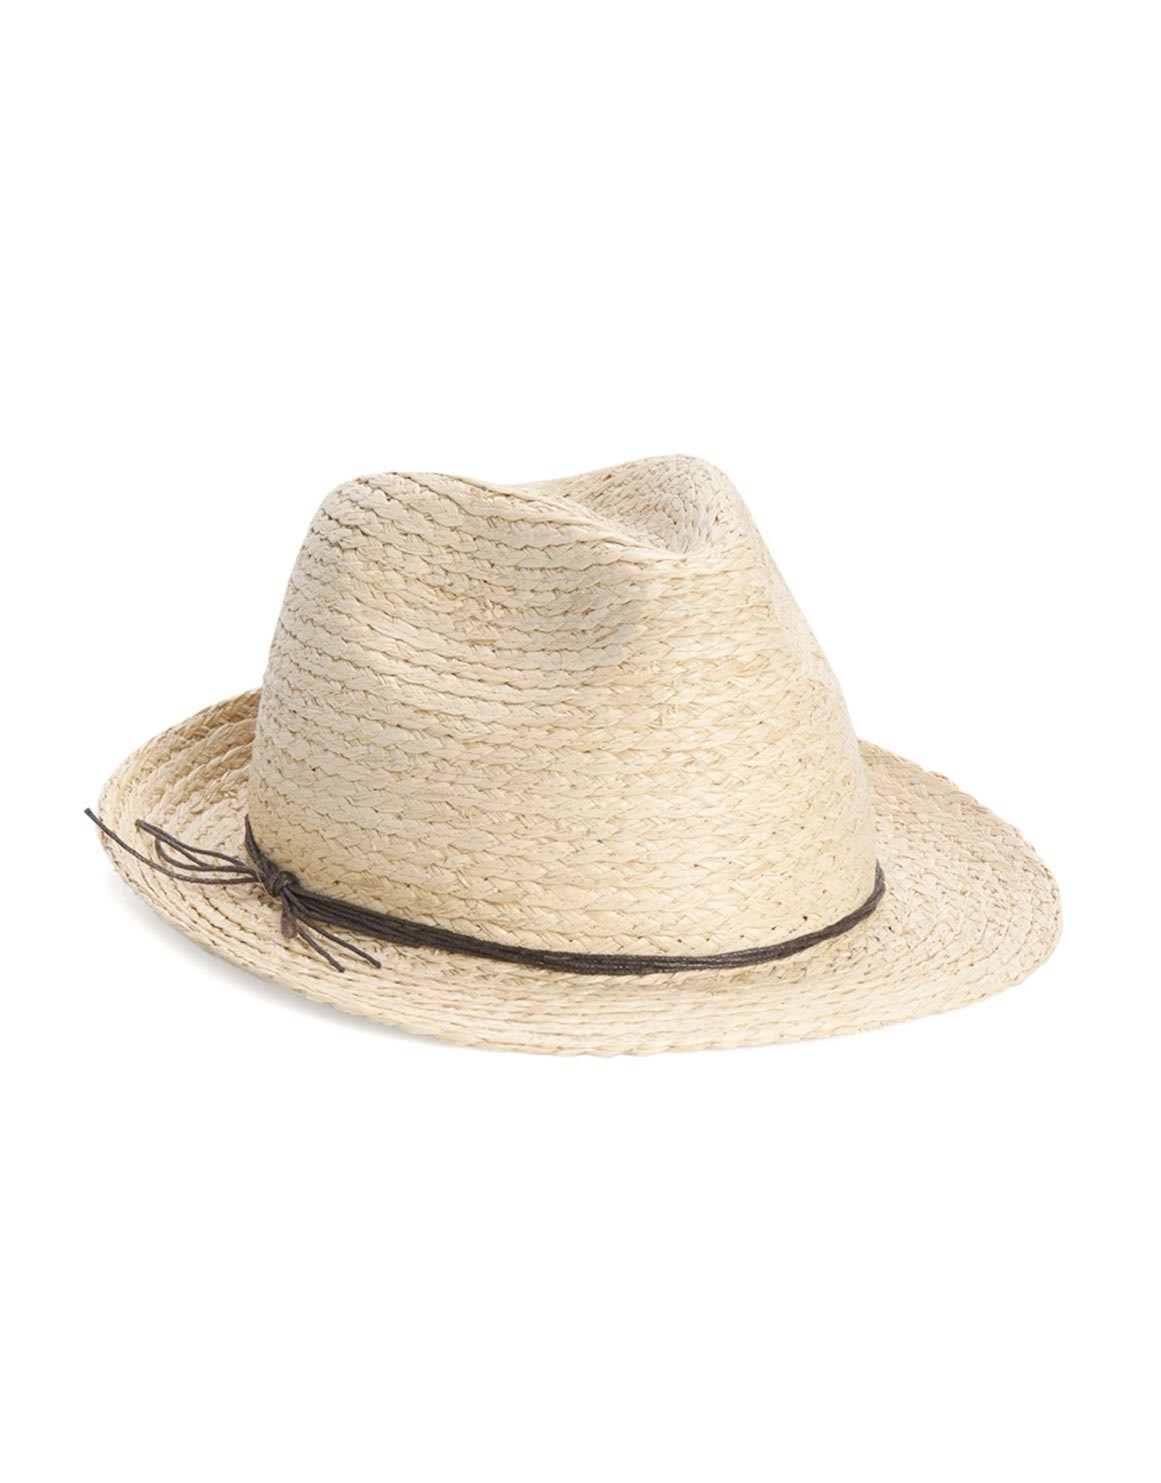 4 Must-Have Hats